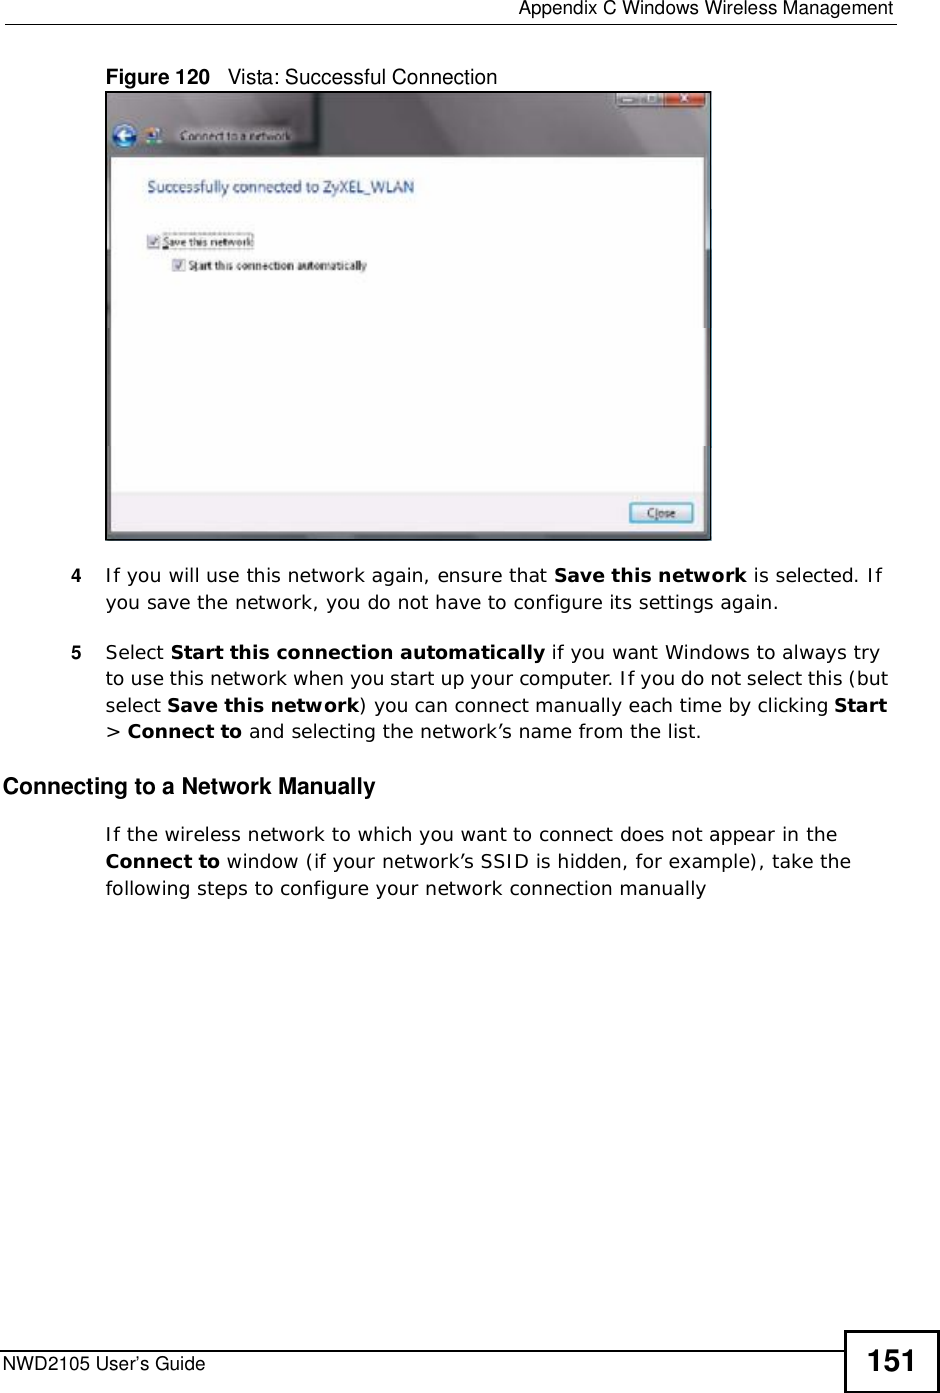  Appendix CWindows Wireless ManagementNWD2105 User’s Guide 151Figure 120   Vista: Successful Connection4If you will use this network again, ensure that Save this network is selected. If you save the network, you do not have to configure its settings again.5Select Start this connection automatically if you want Windows to always try to use this network when you start up your computer. If you do not select this (but select Save this network) you can connect manually each time by clicking Start&gt;Connect to and selecting the network’s name from the list.Connecting to a Network ManuallyIf the wireless network to which you want to connect does not appear in the Connect to window (if your network’s SSID is hidden, for example), take the following steps to configure your network connection manually